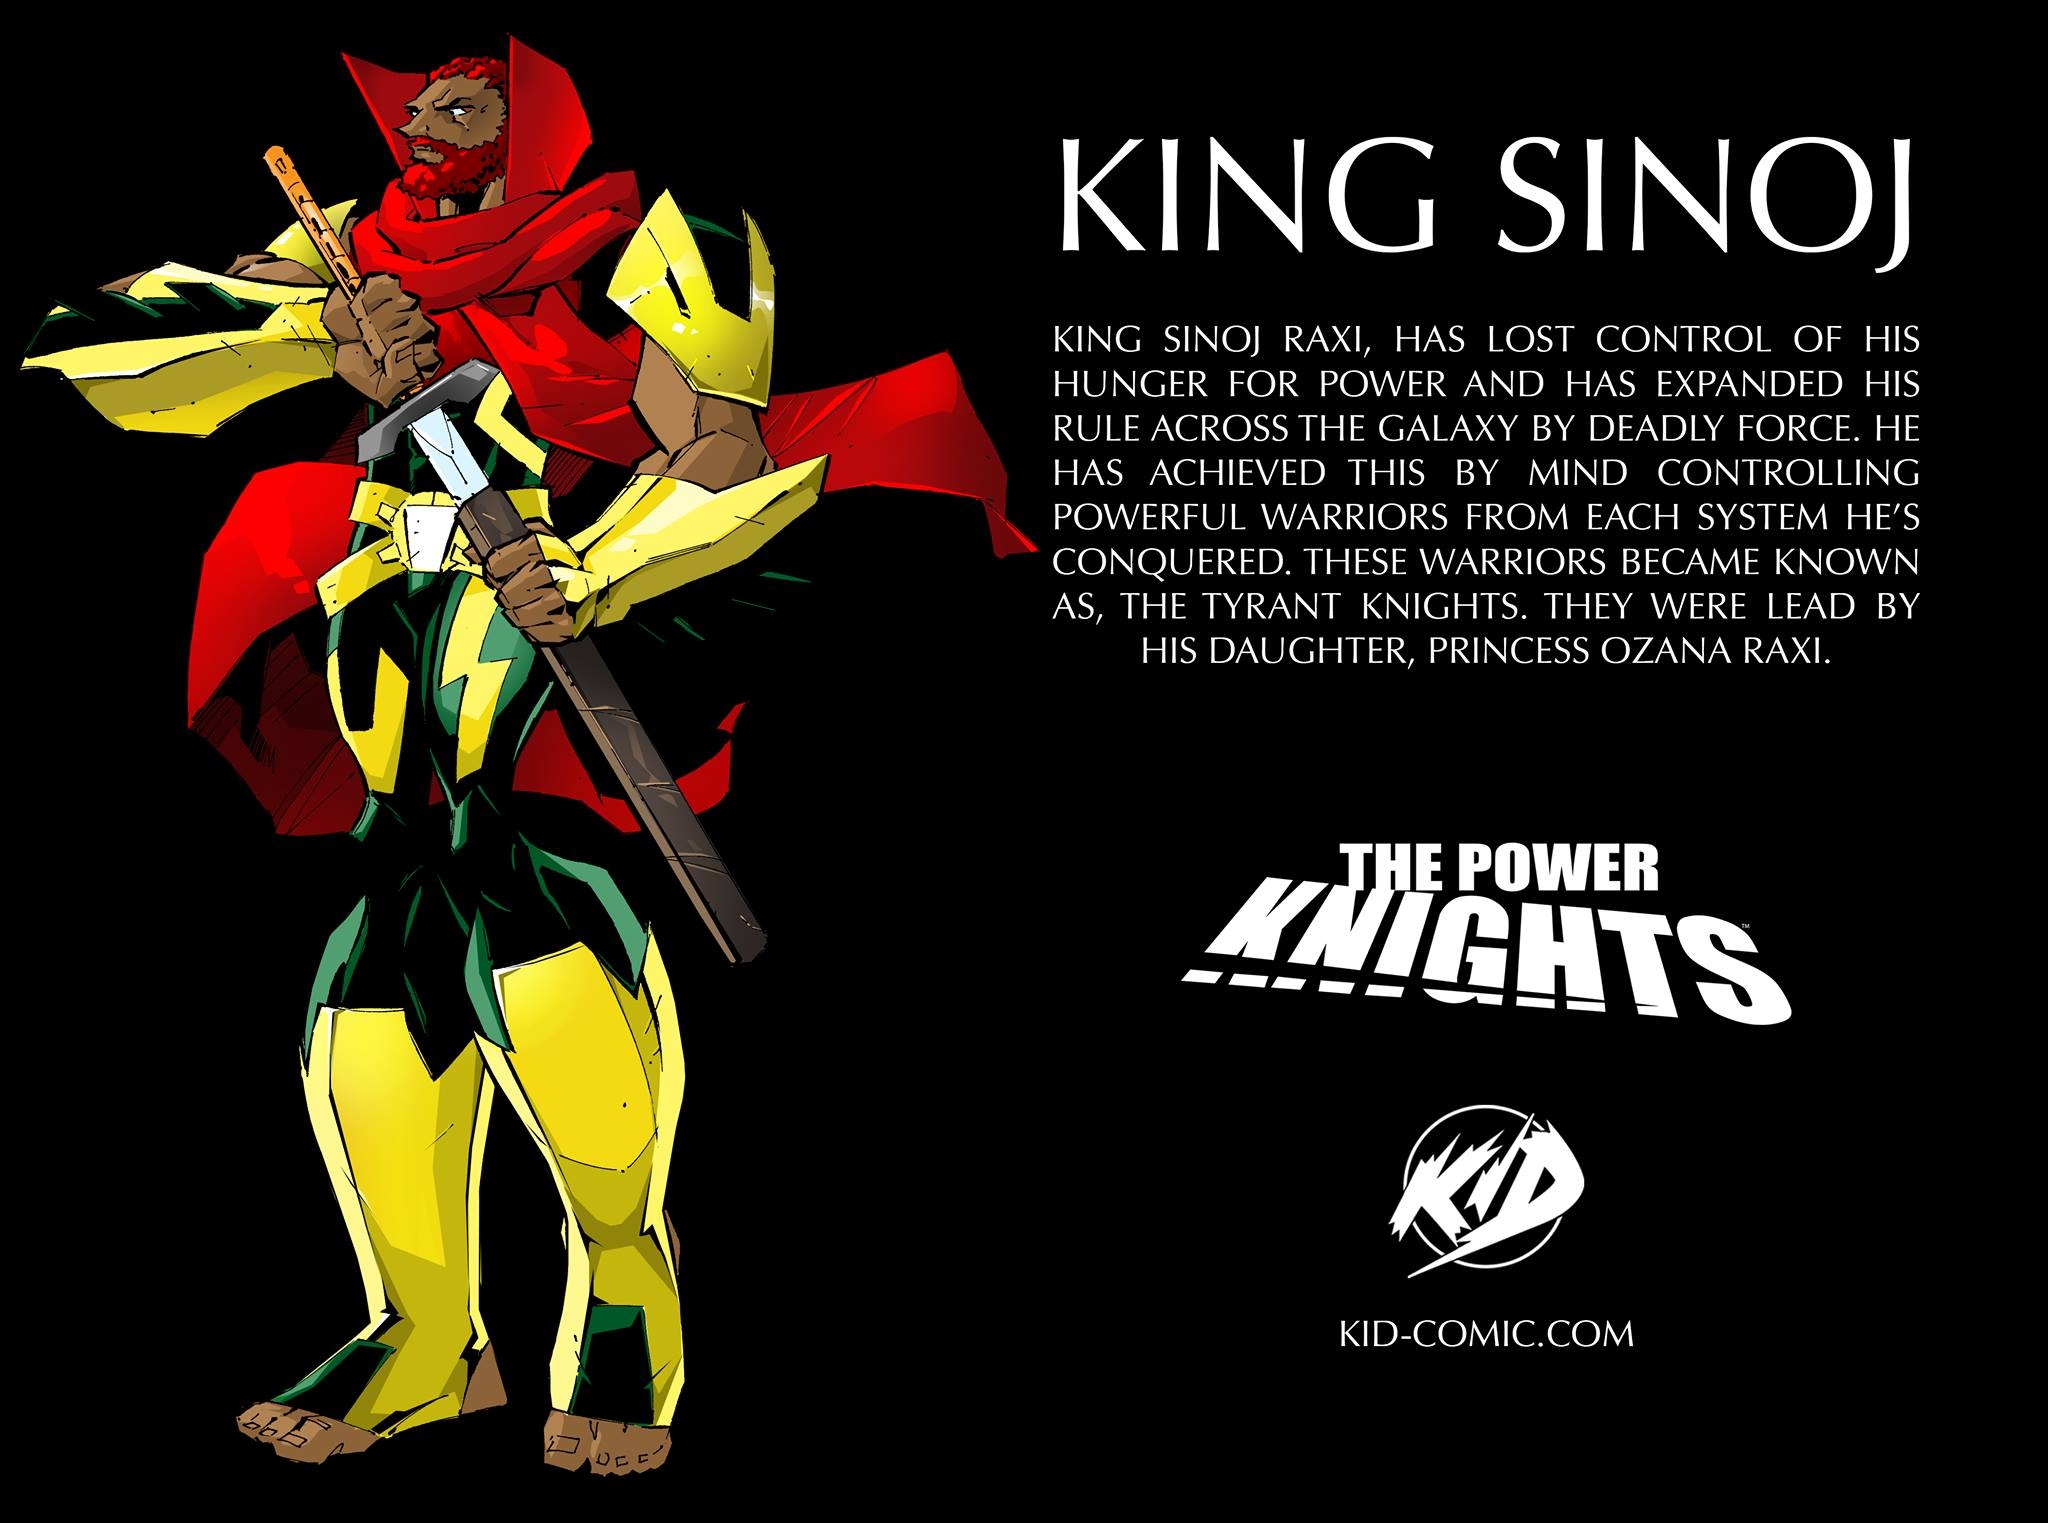 Jones Presents  The Power Knights: Unbounded 3 Kickstarter, Produce it and spread the word.